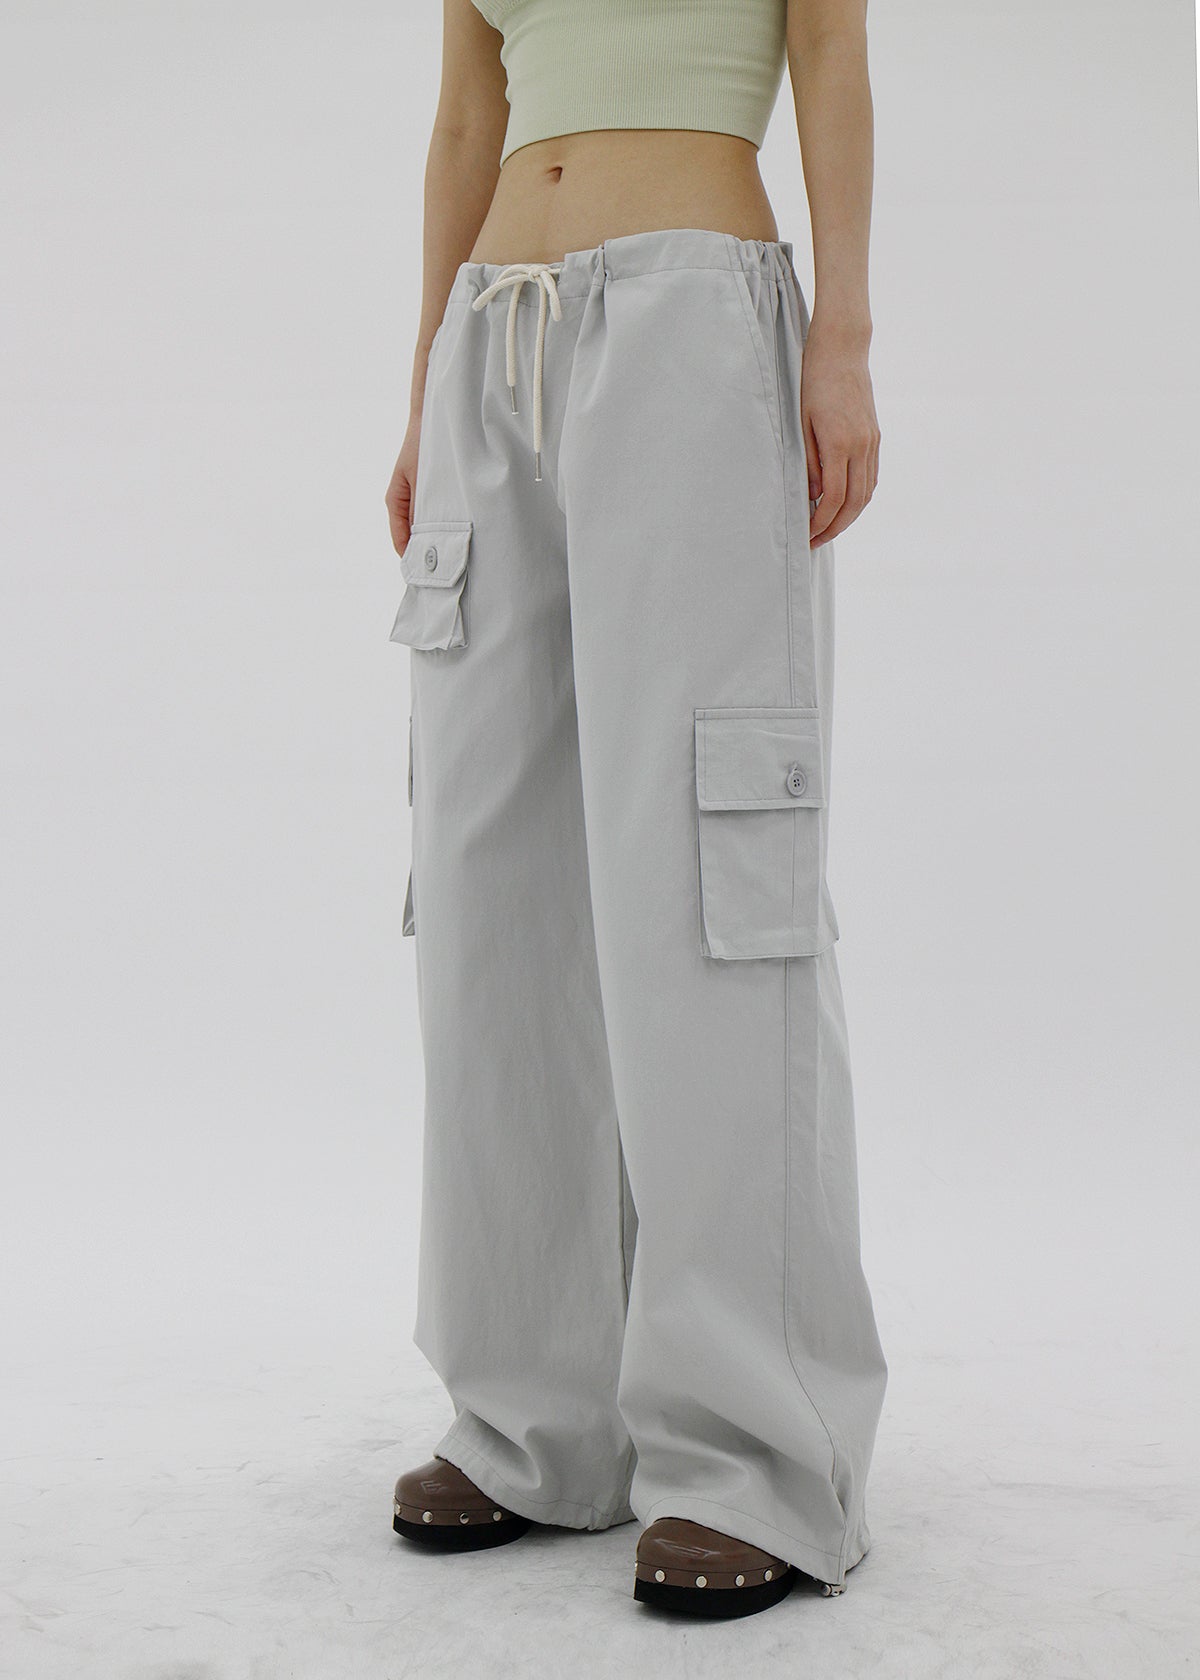 low-rise pocket-string gray trousers